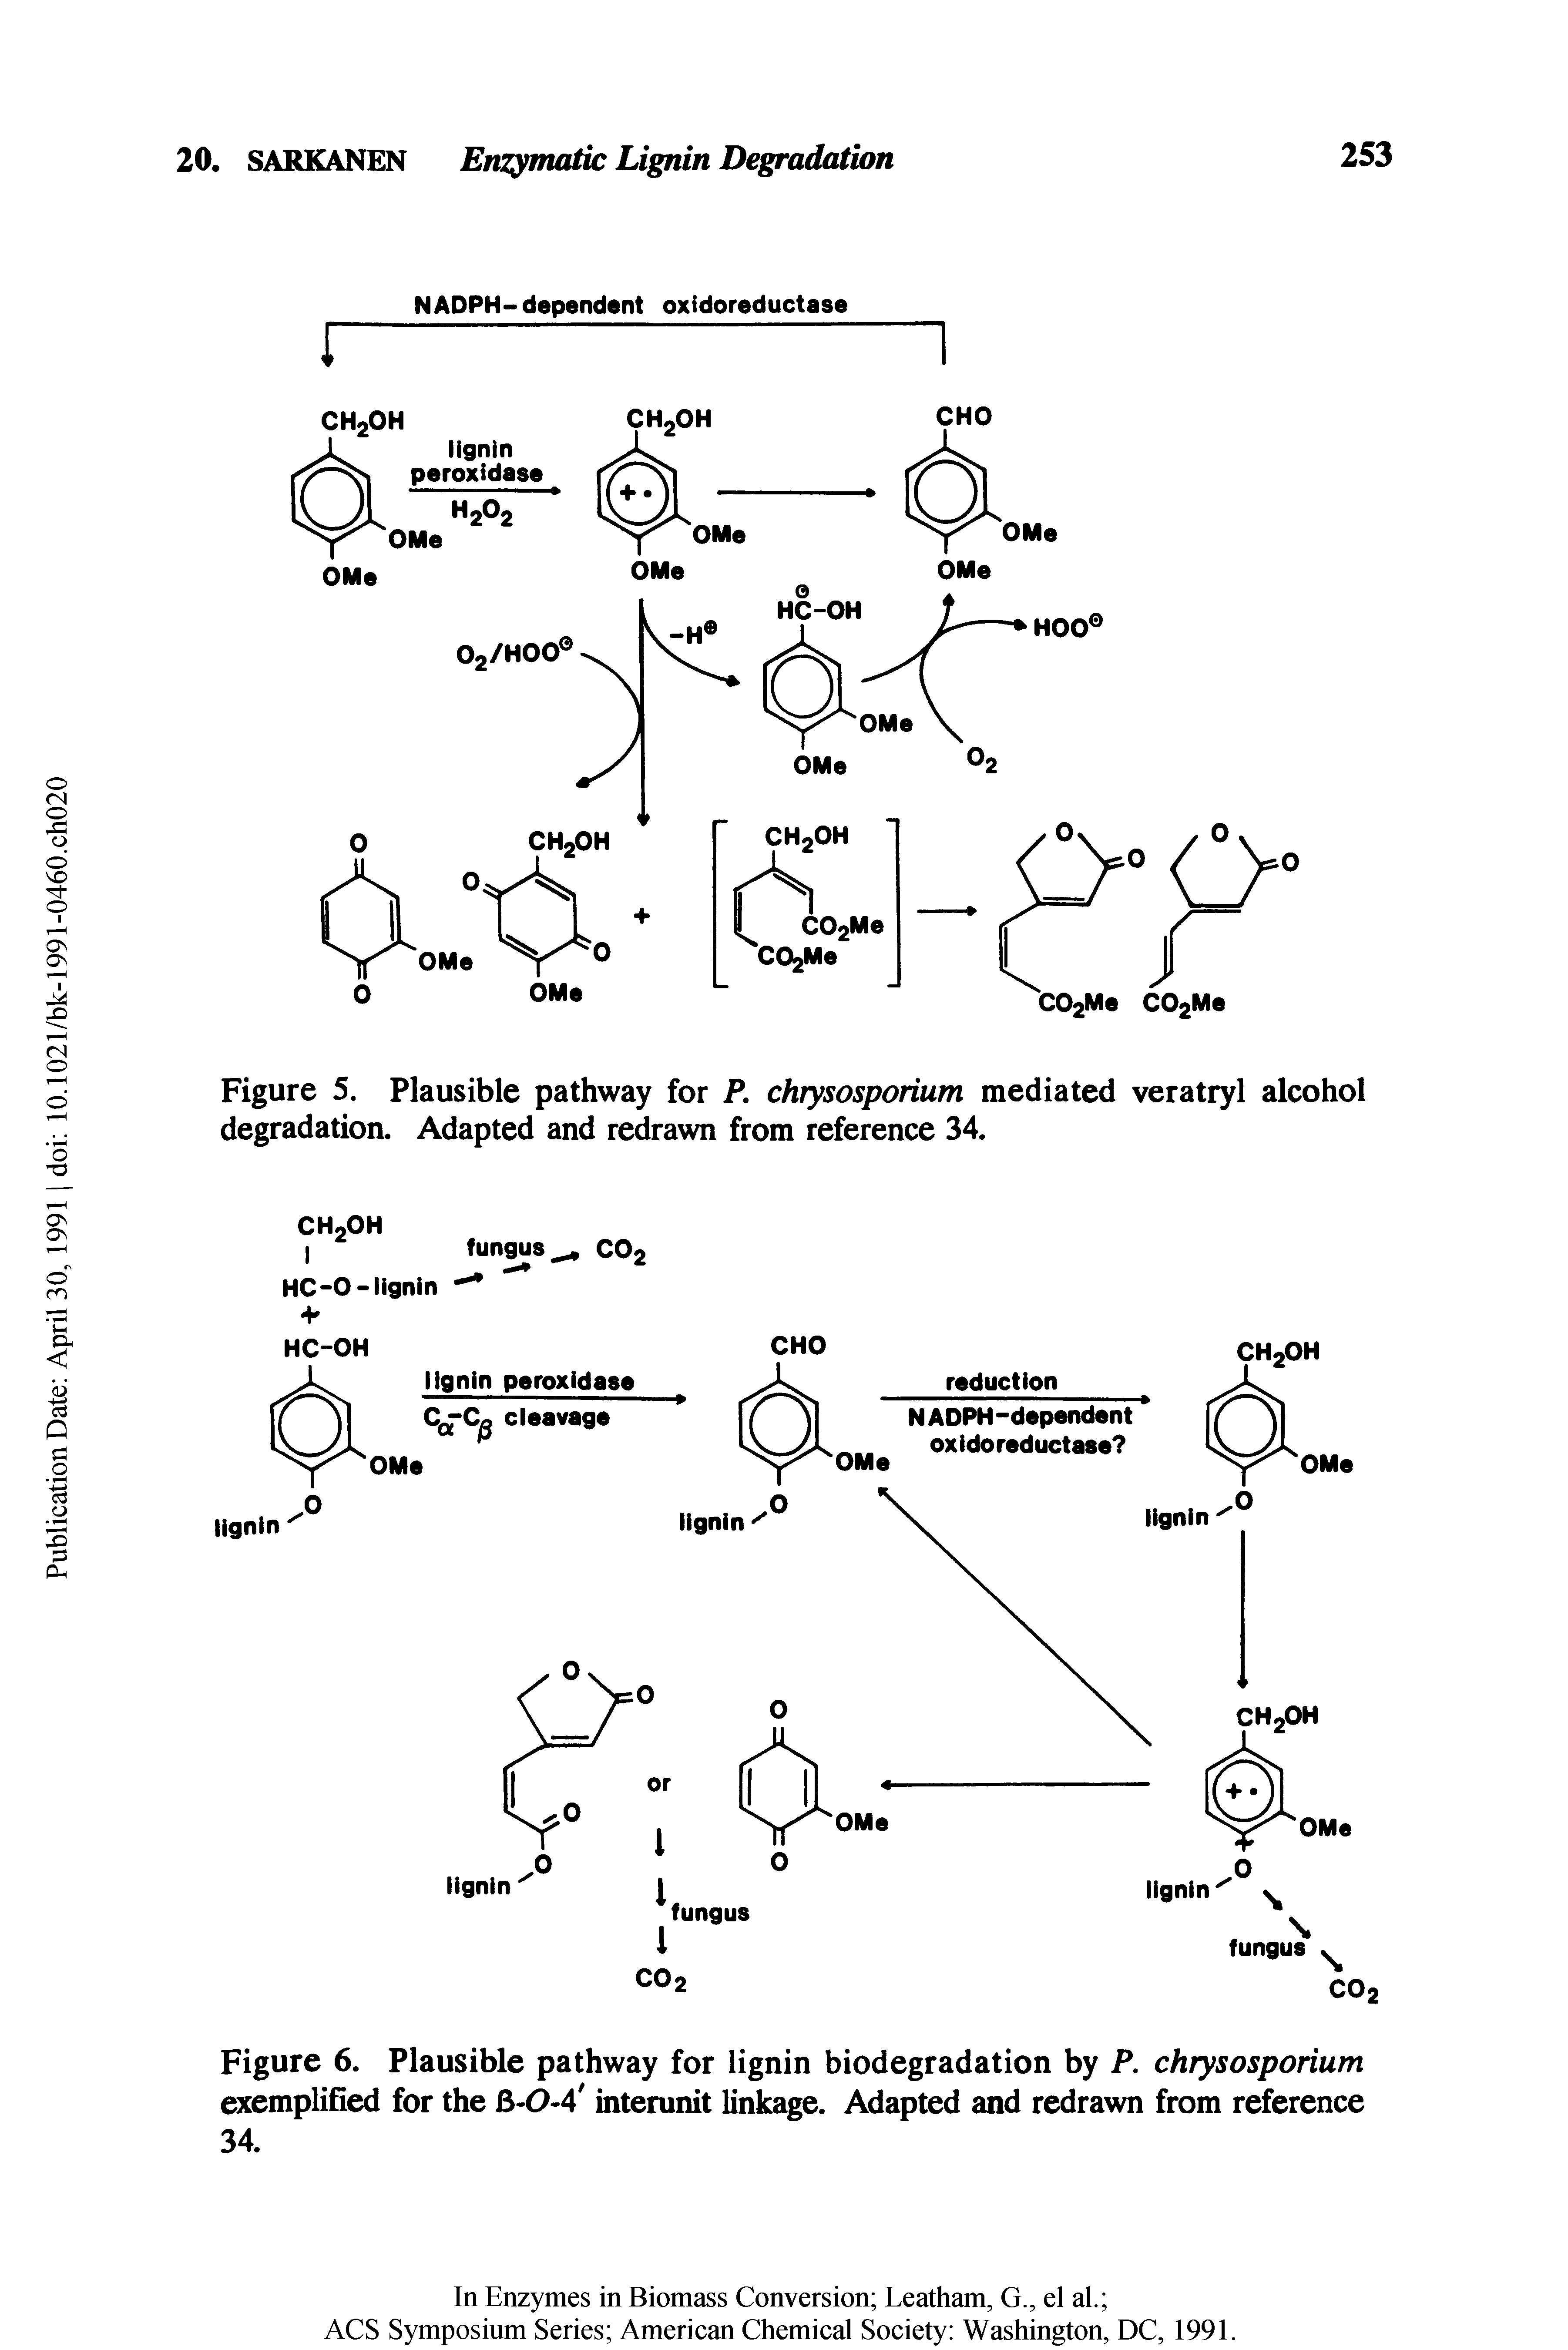 Figure 5. Plausible pathway for P, chrysosporium mediated veratryl alcohol degradation. Adapted and redrawn from reference 34.